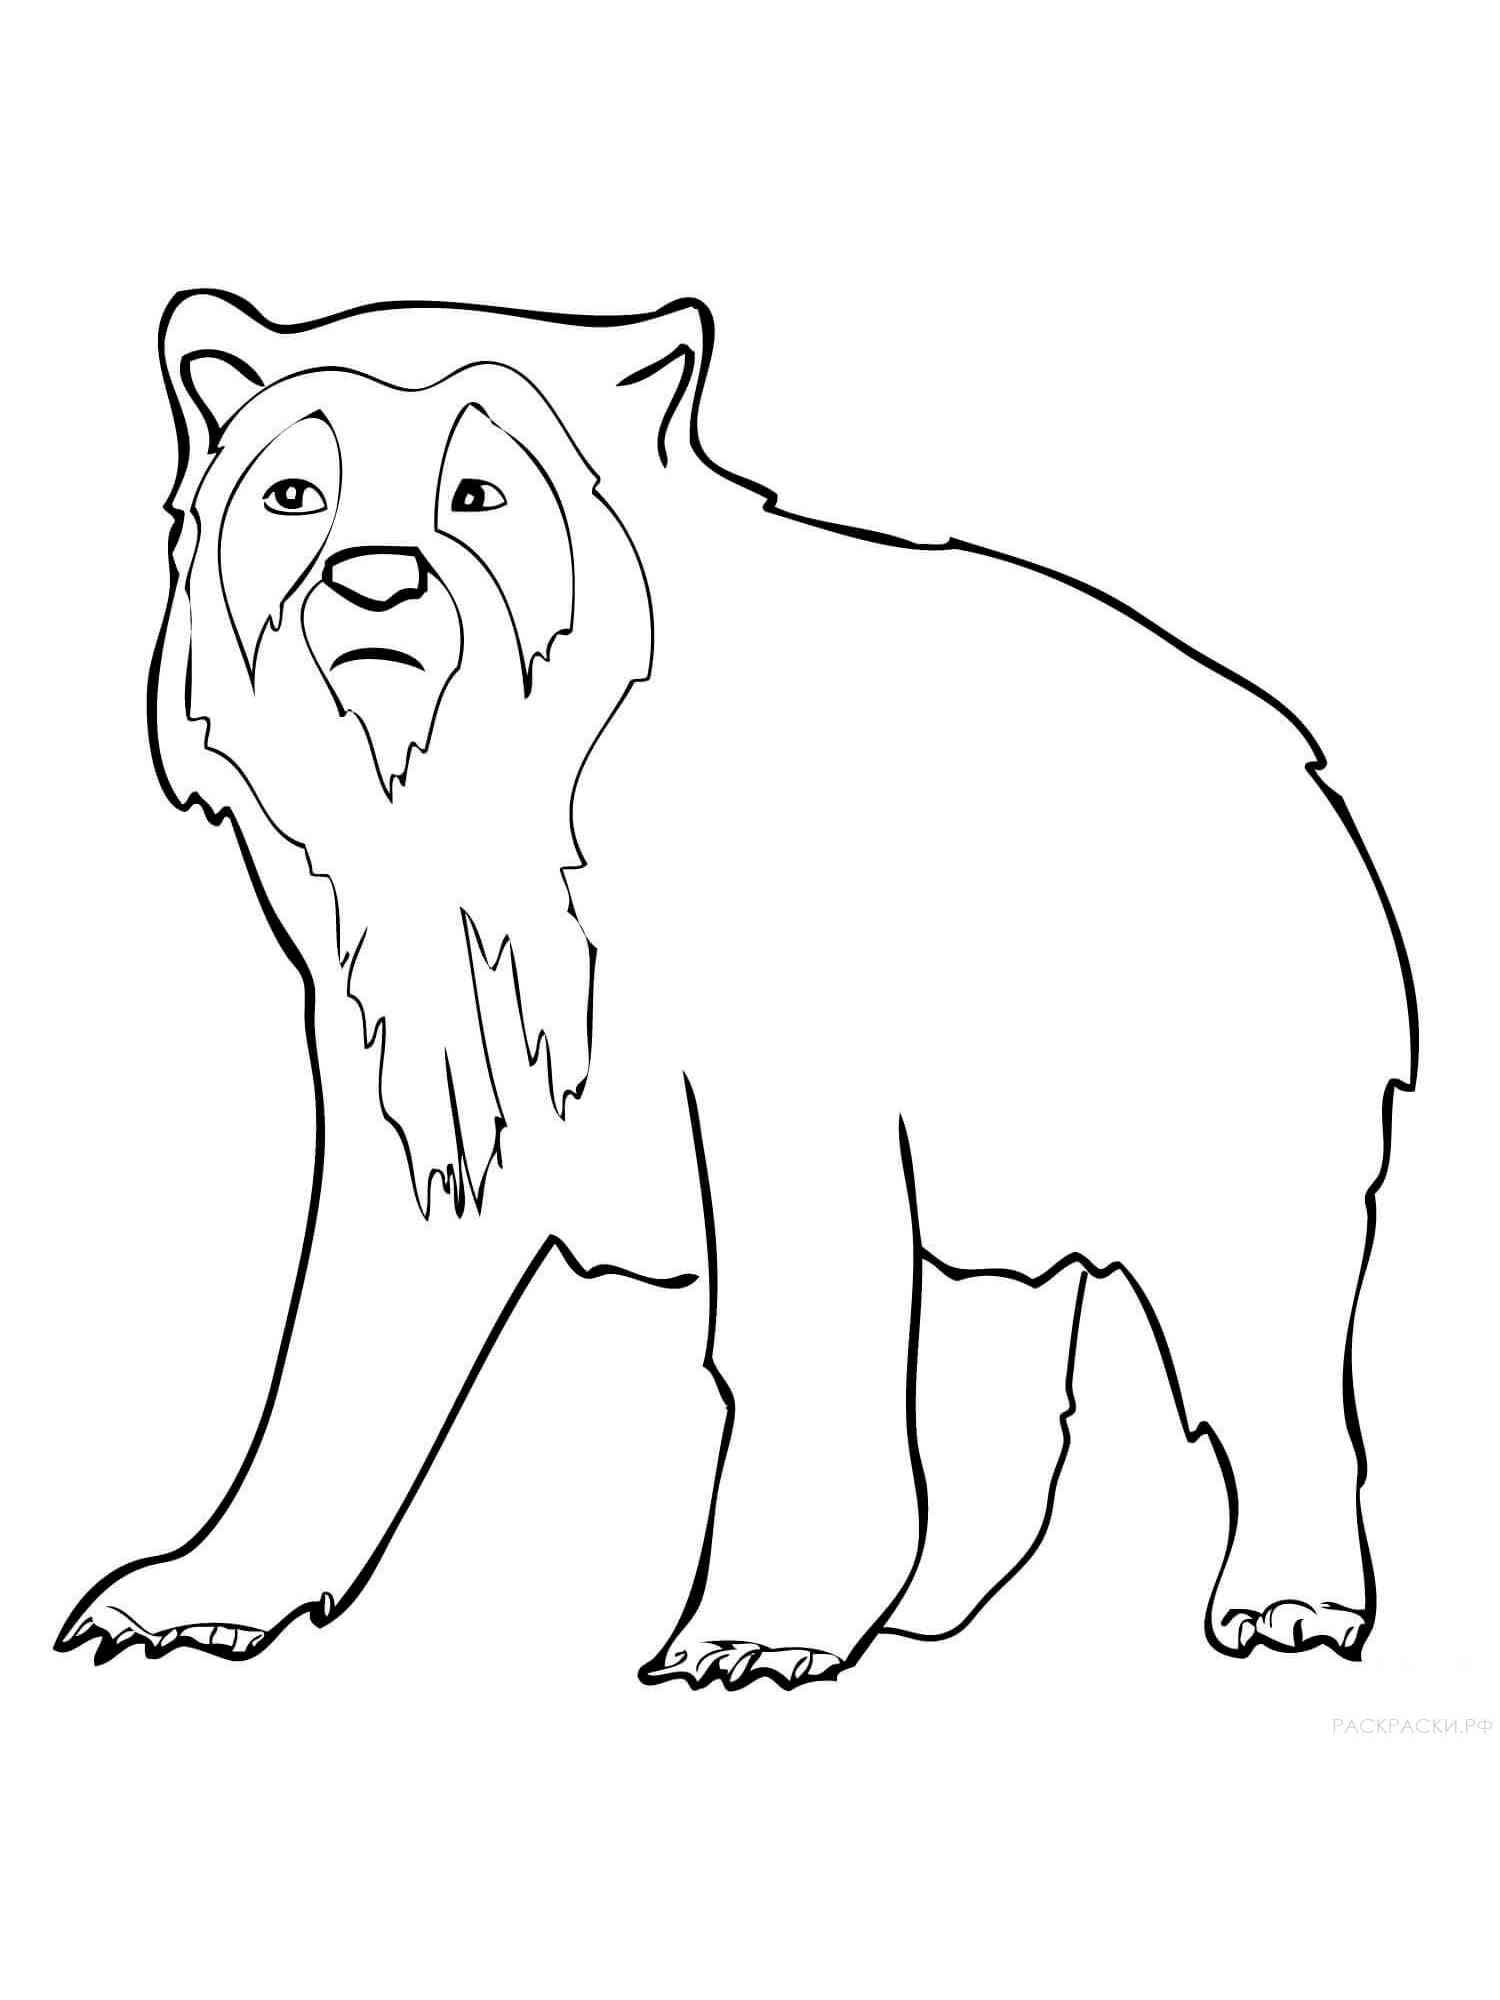 Andean Bear coloring page